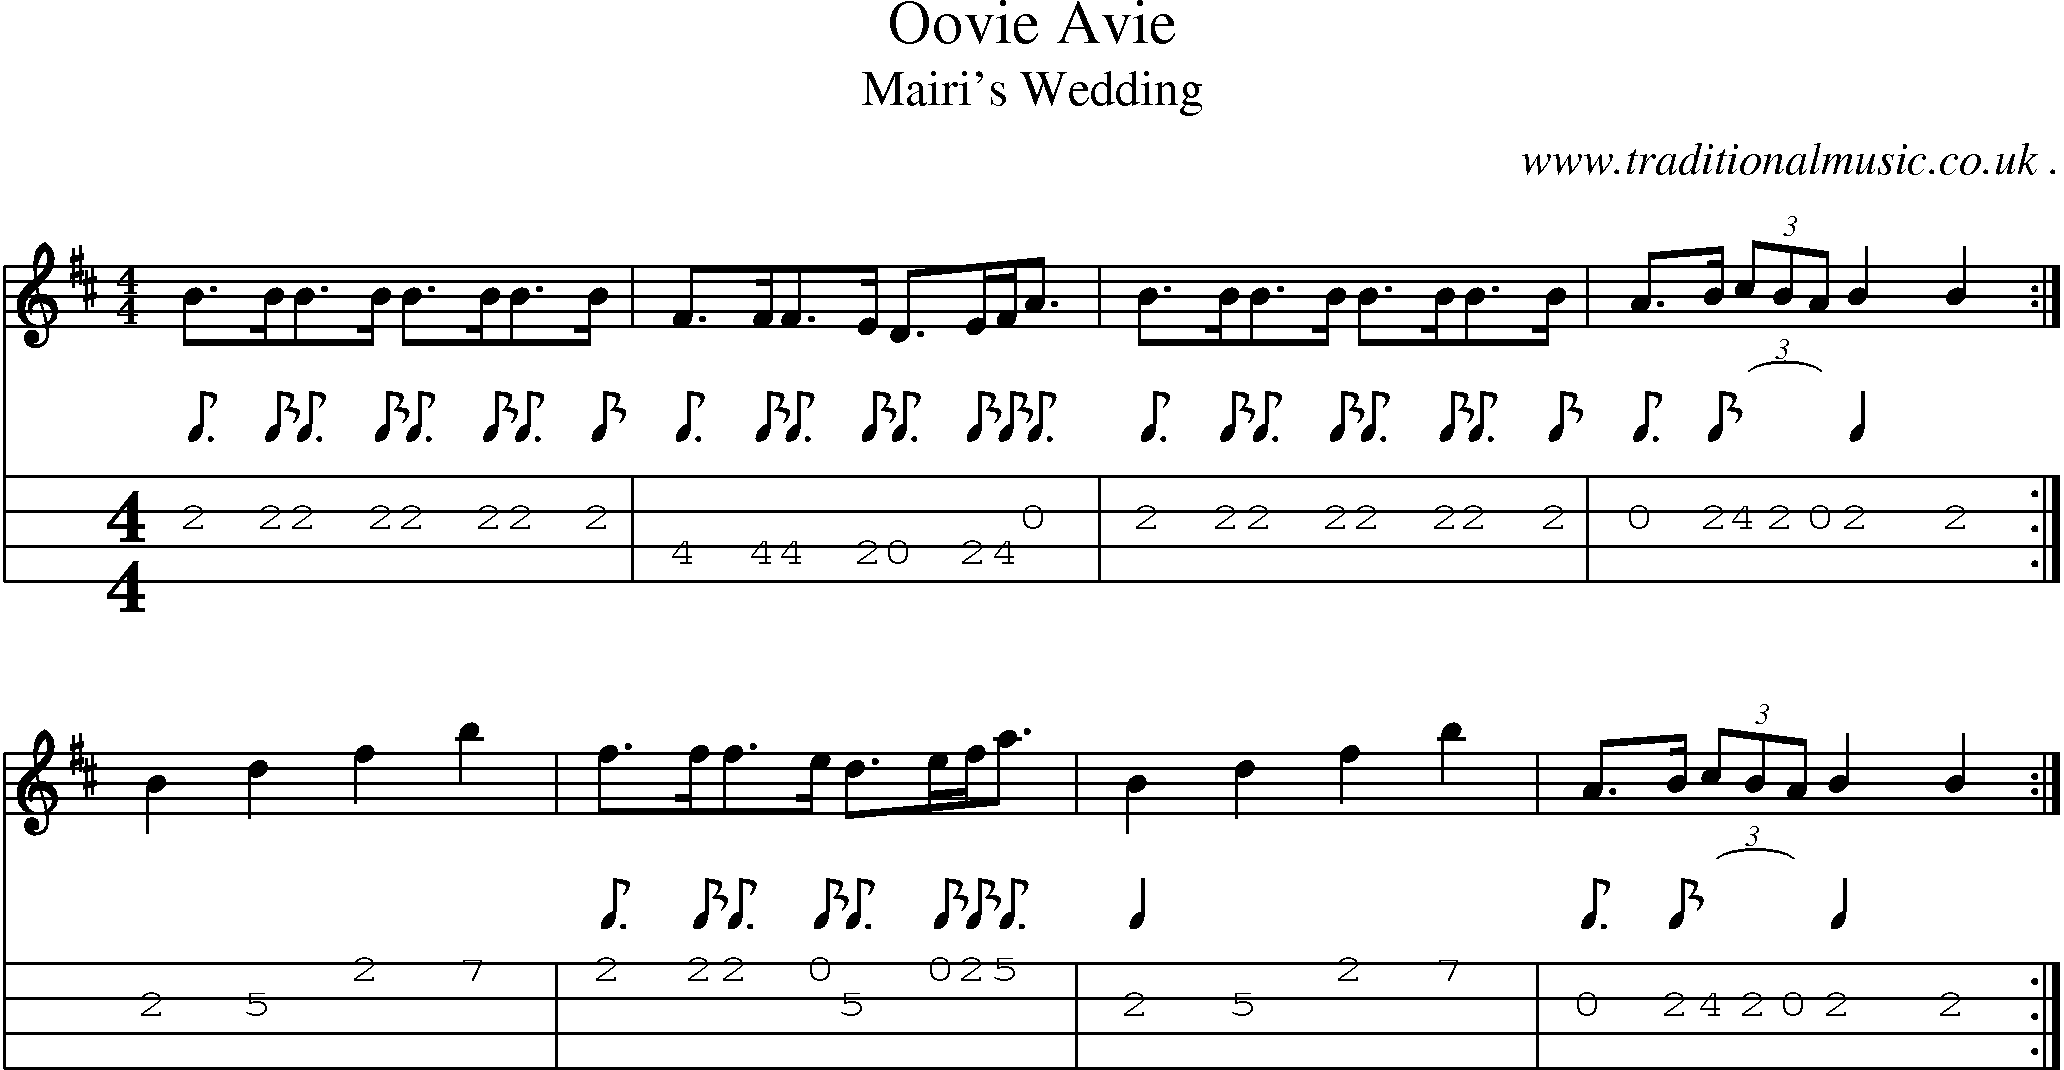 Sheet-music  score, Chords and Mandolin Tabs for Oovie Avie